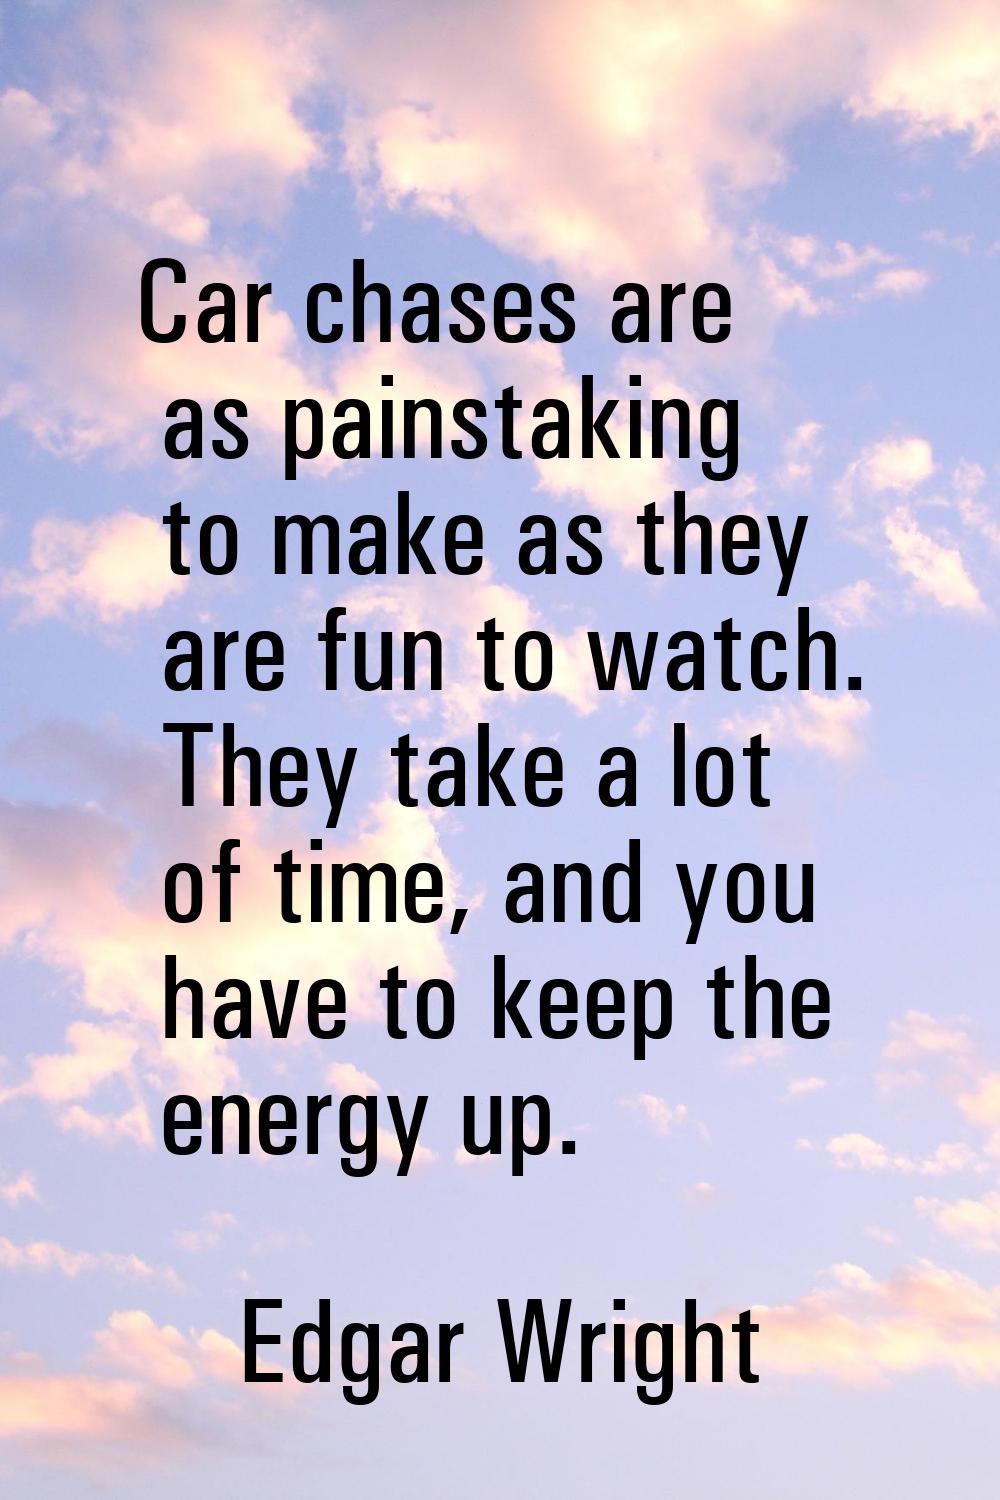 Car chases are as painstaking to make as they are fun to watch. They take a lot of time, and you ha